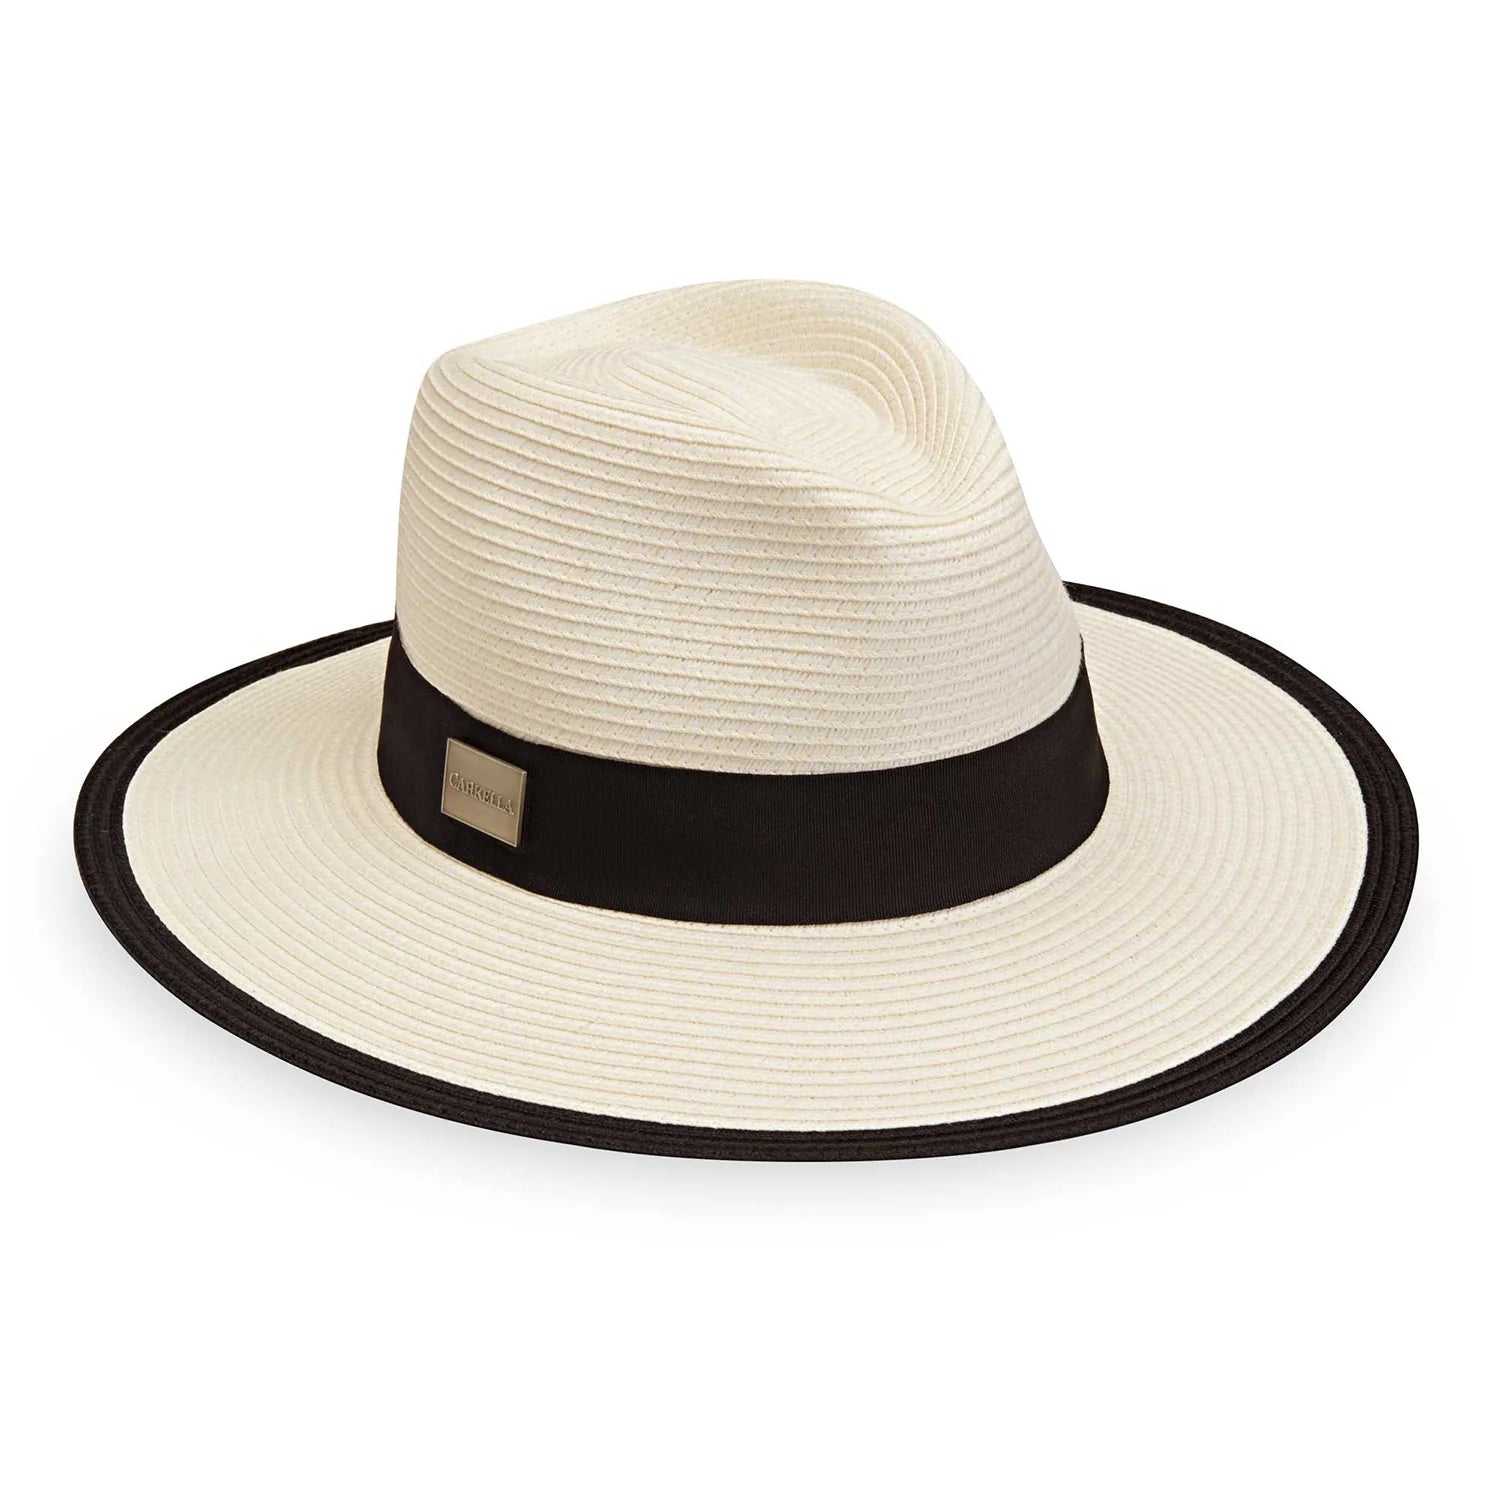 Opt for a bolder look with the pairing of contrasting colours and the classic fedora. Made from our exclusive Flexi-Weave fabric, it can travel anywhere you dare to go.